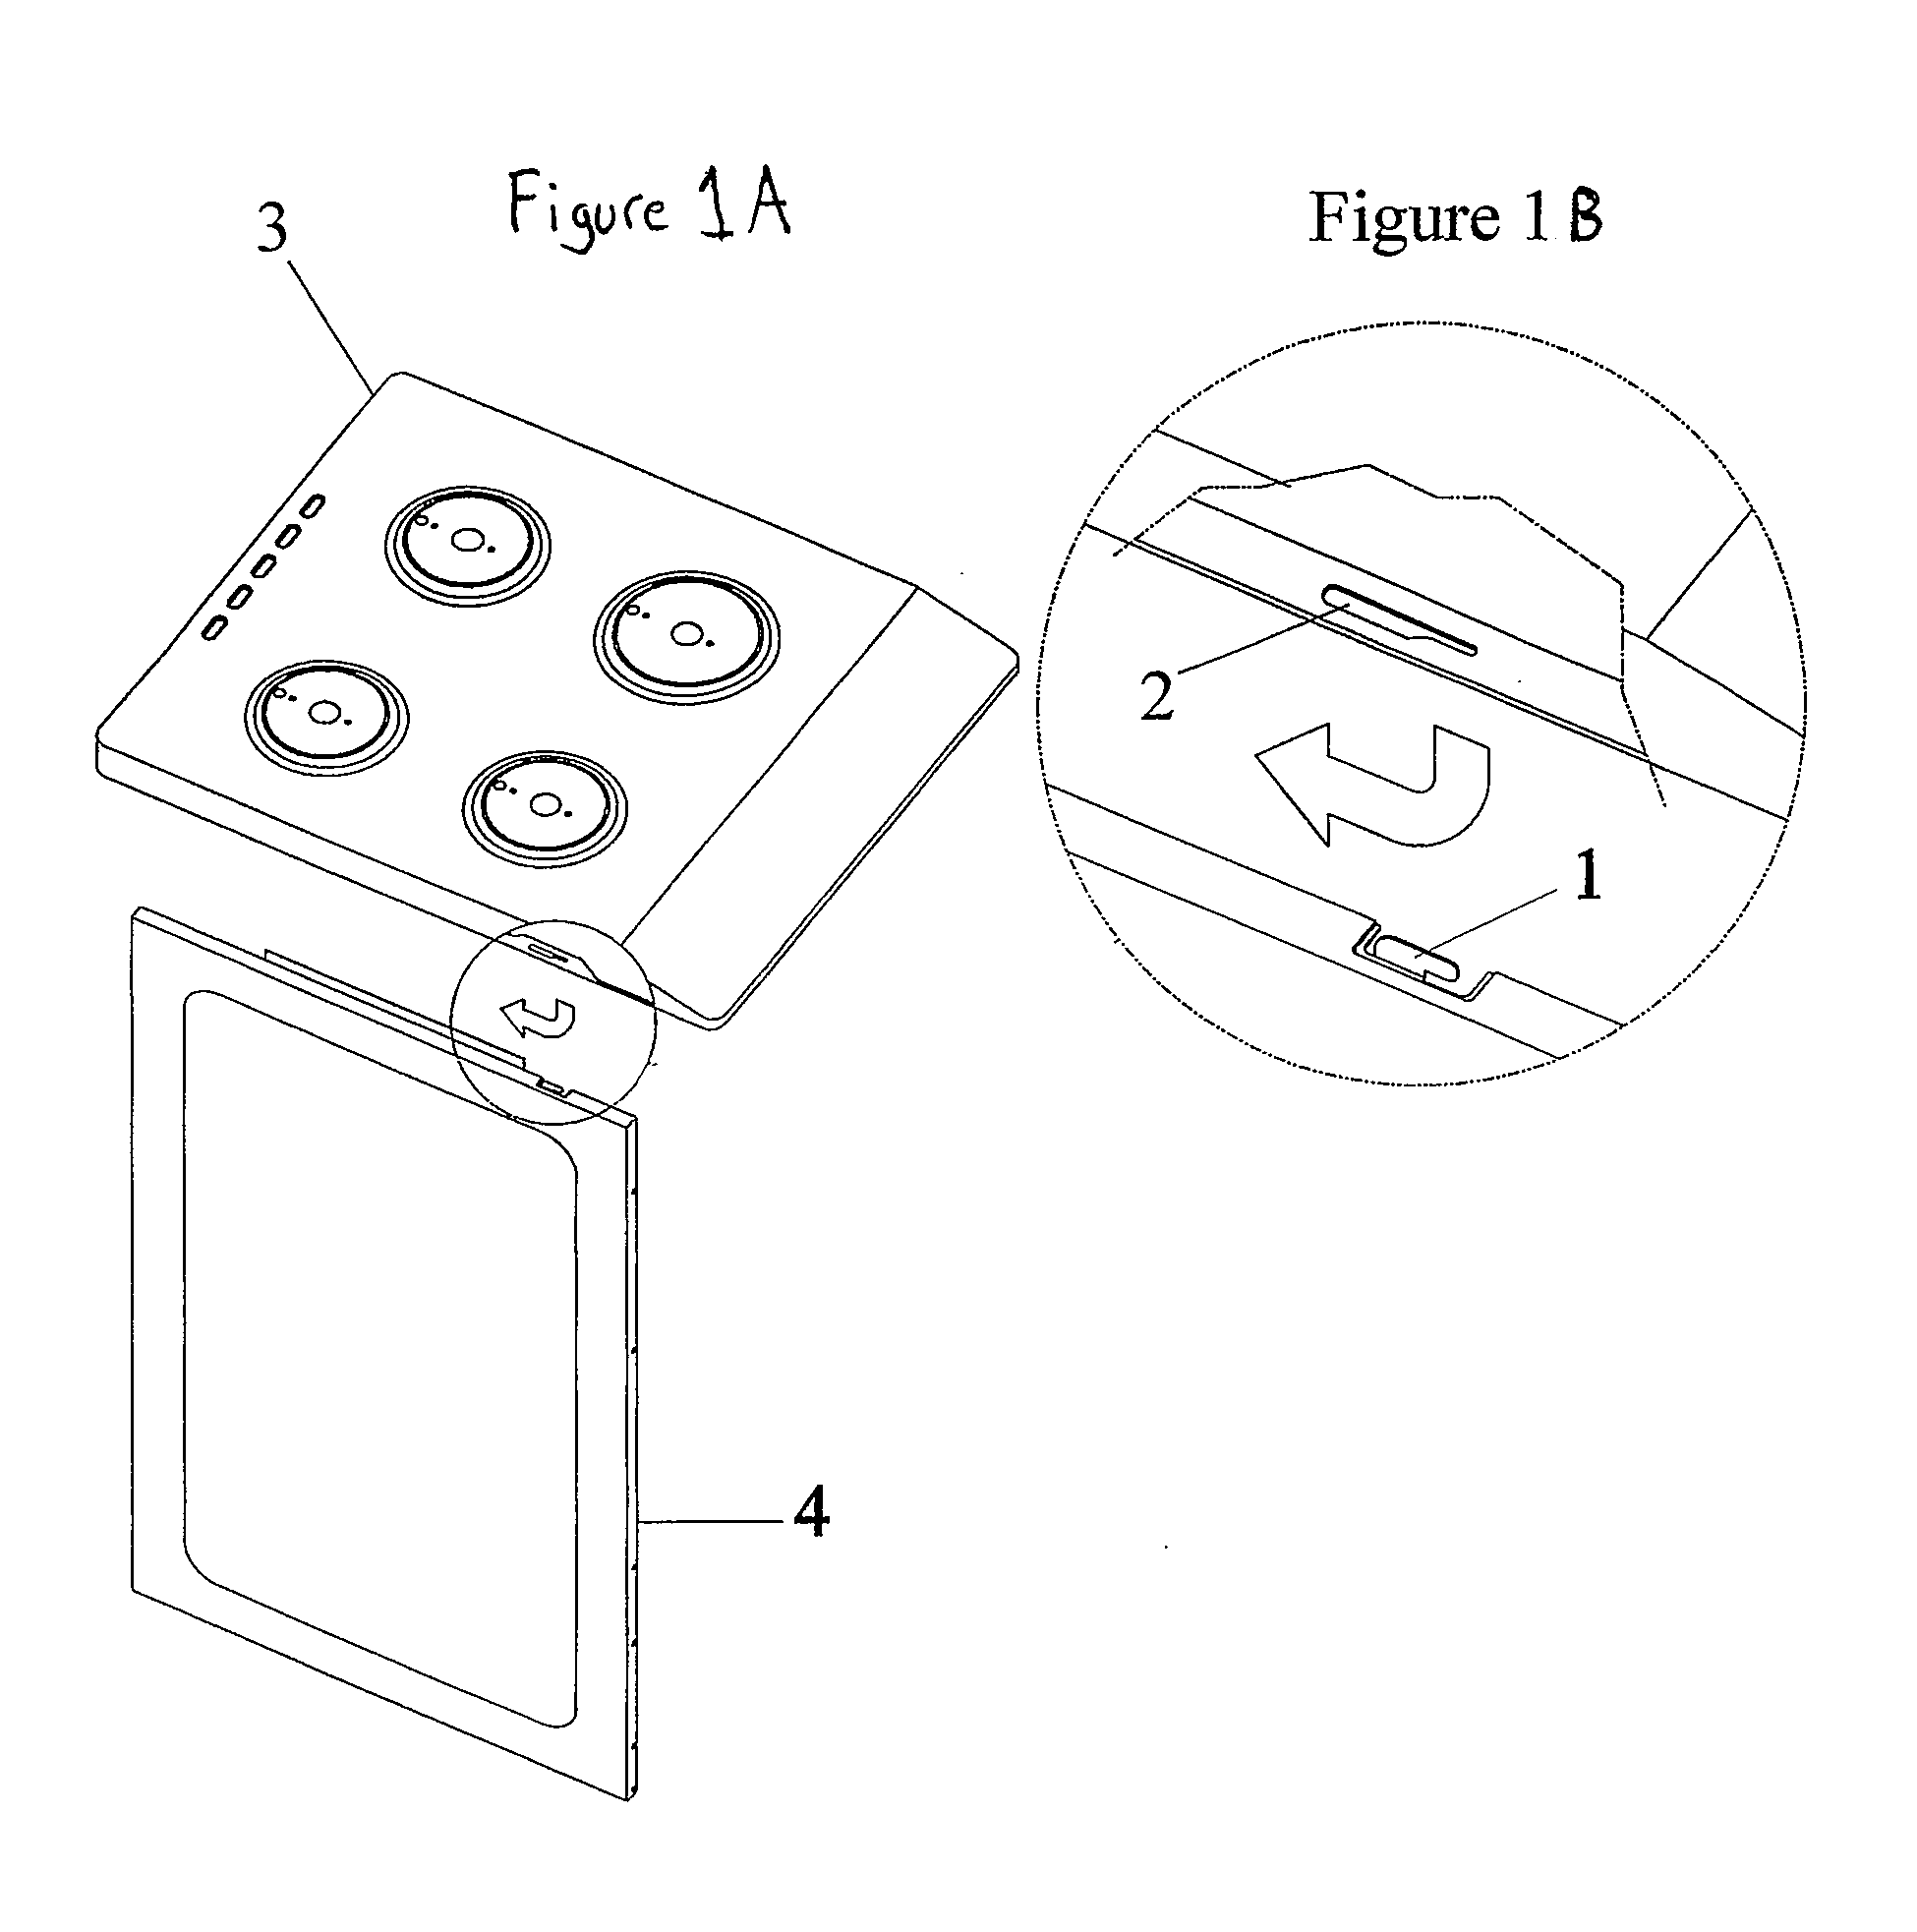 Stove with assembly components